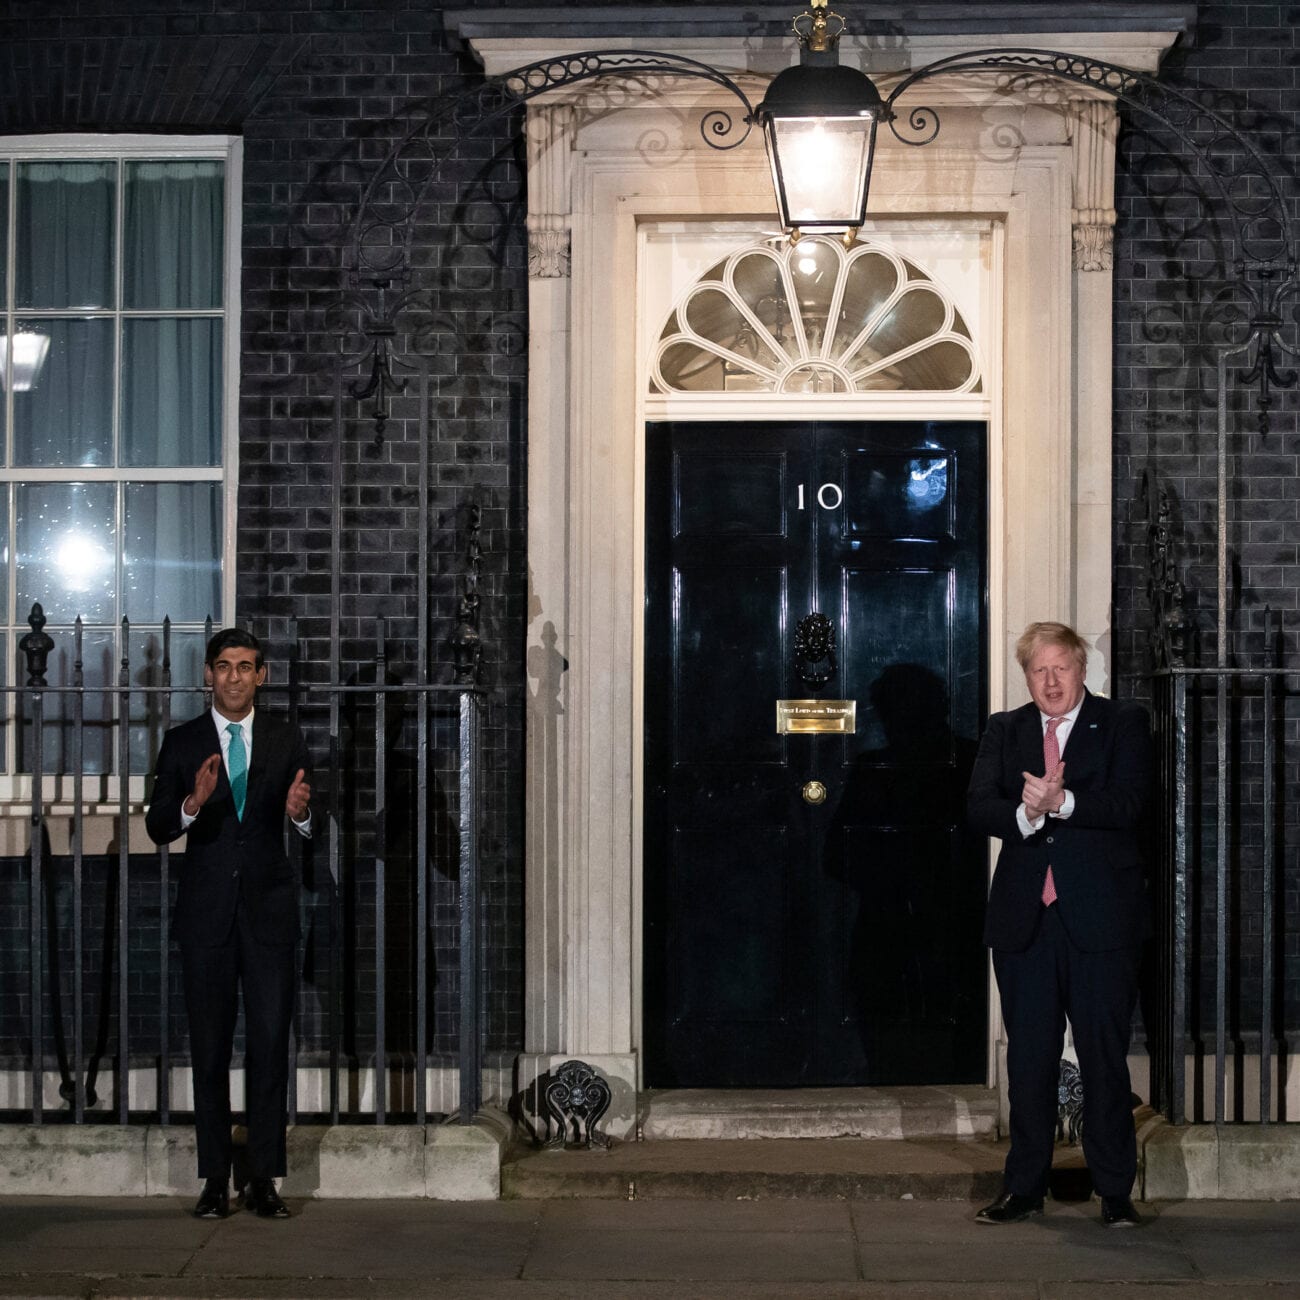 10 Downing Street is dealing with resignations left and right. But what exactly is causing so many staffers to leave?